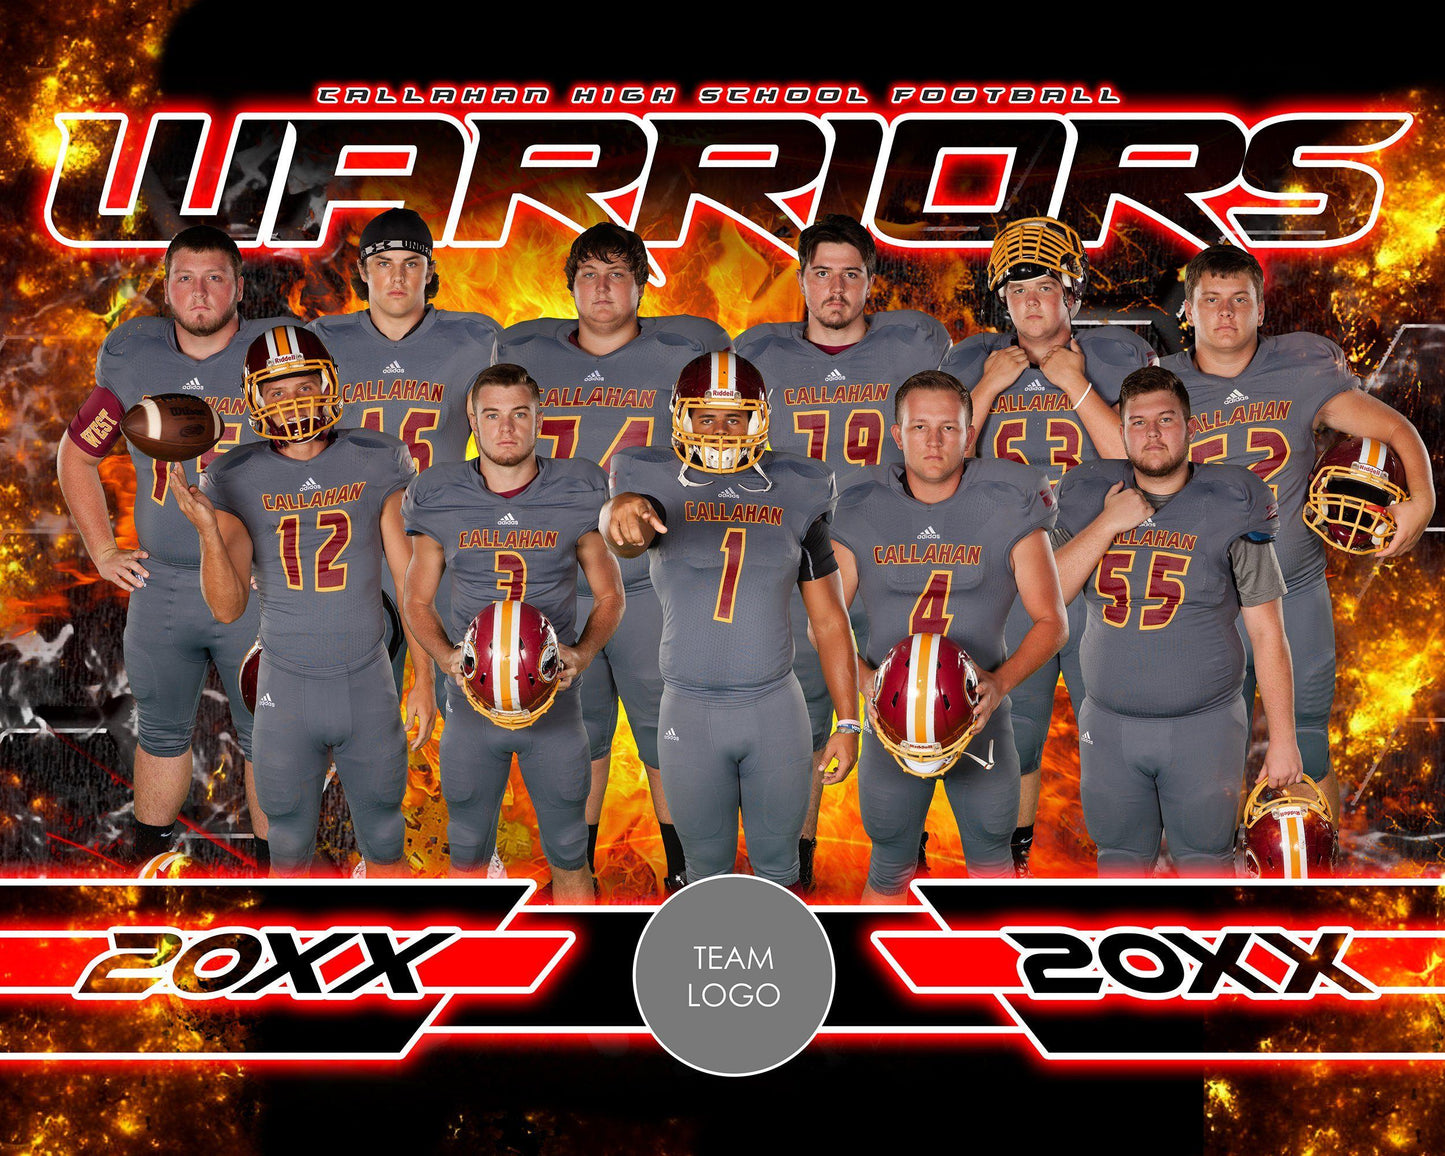 Inferno v.3-2 - Xtreme Team Photoshop Template-Photoshop Template - Photo Solutions